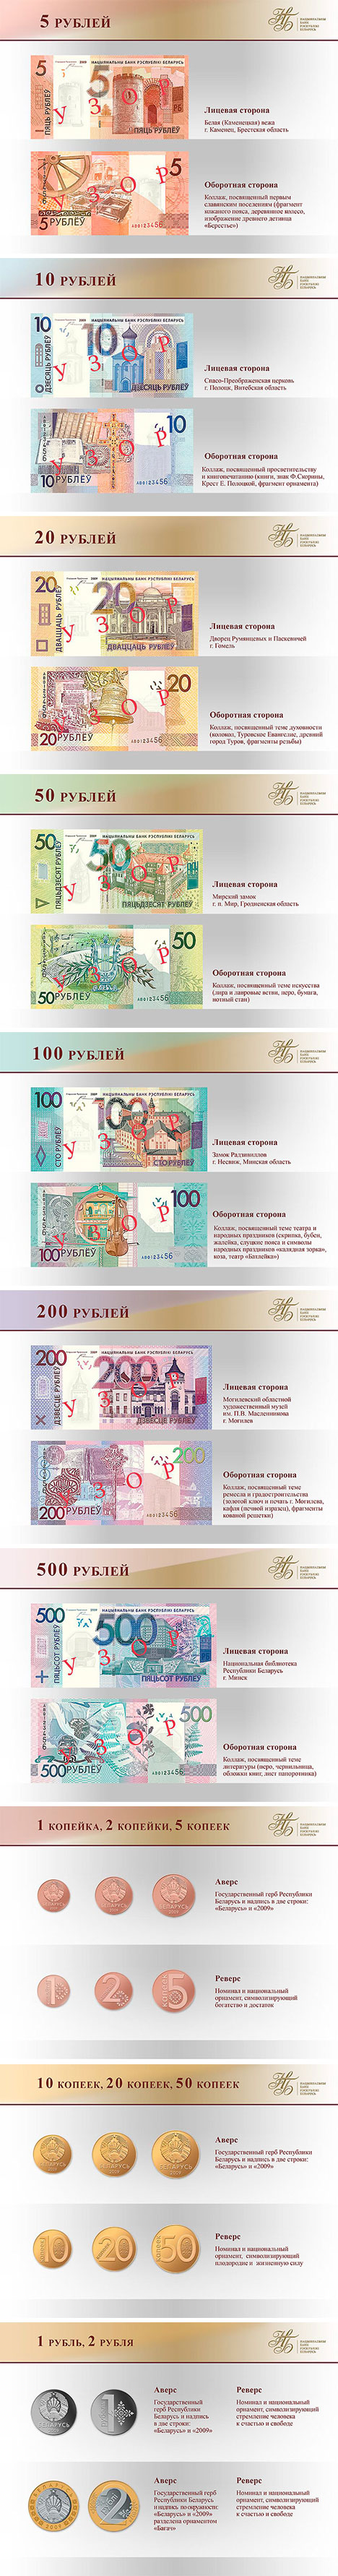 Official currency of the Republic of Belarus. Banknotes and coins designed in 2009